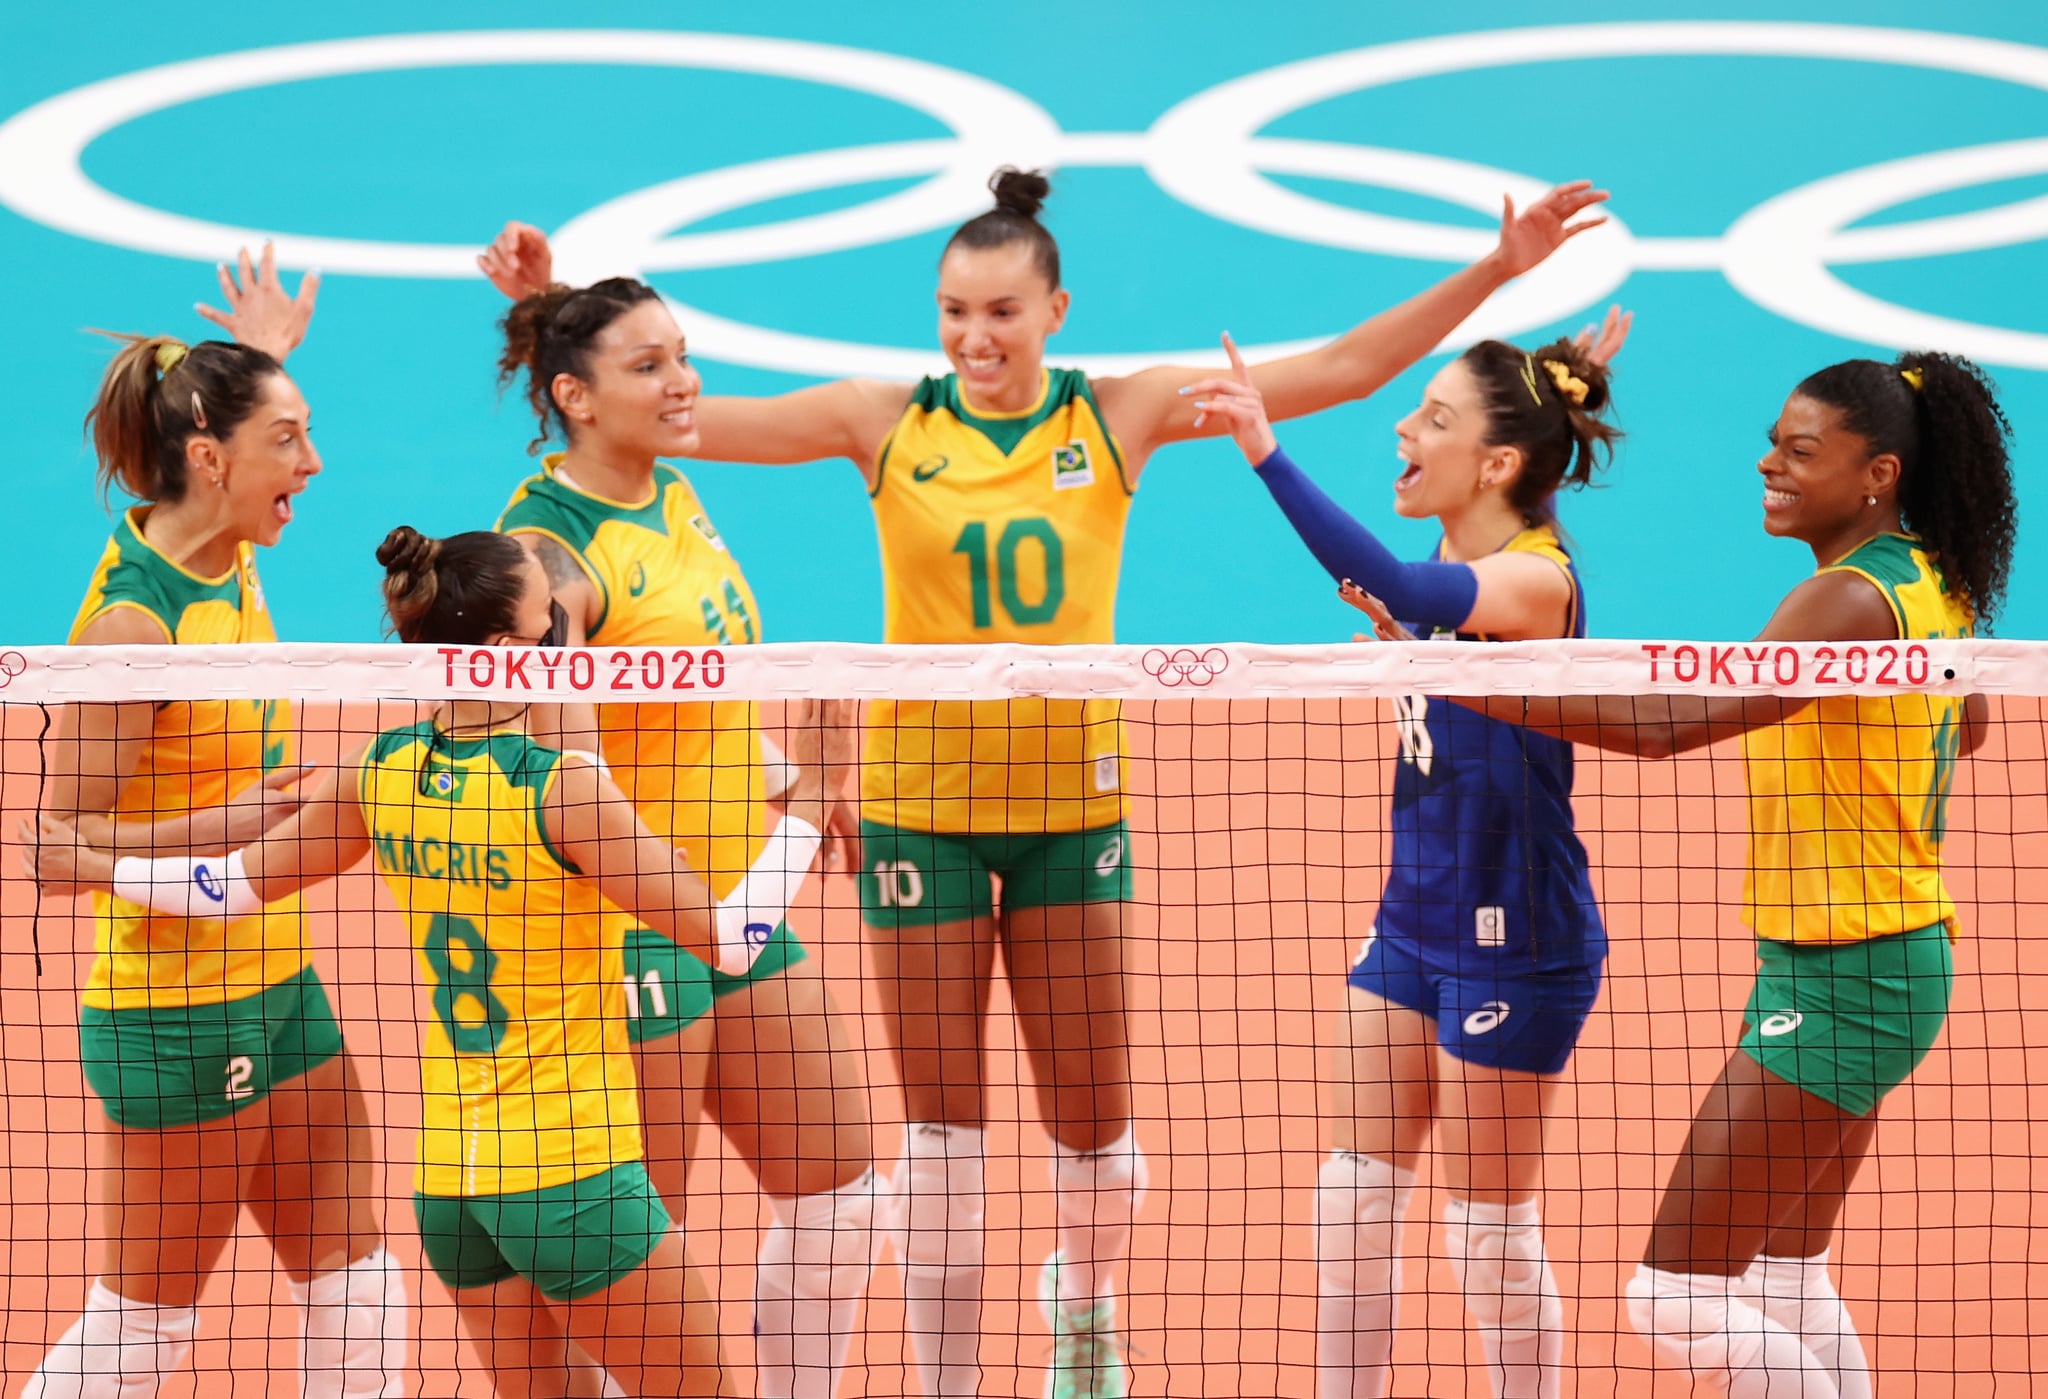 TOKYO, JAPAN - JULY 25: Gabriela Braga Guimaraes #10 of Team Brazil reacts with team mates against Team South Korea during the Women's Preliminary - Pool A on day two of the Tokyo 2020 Olympic Games at Ariake Arena on July 25, 2021 in Tokyo, Japan. (Photo by Toru Hanai/Getty Images)